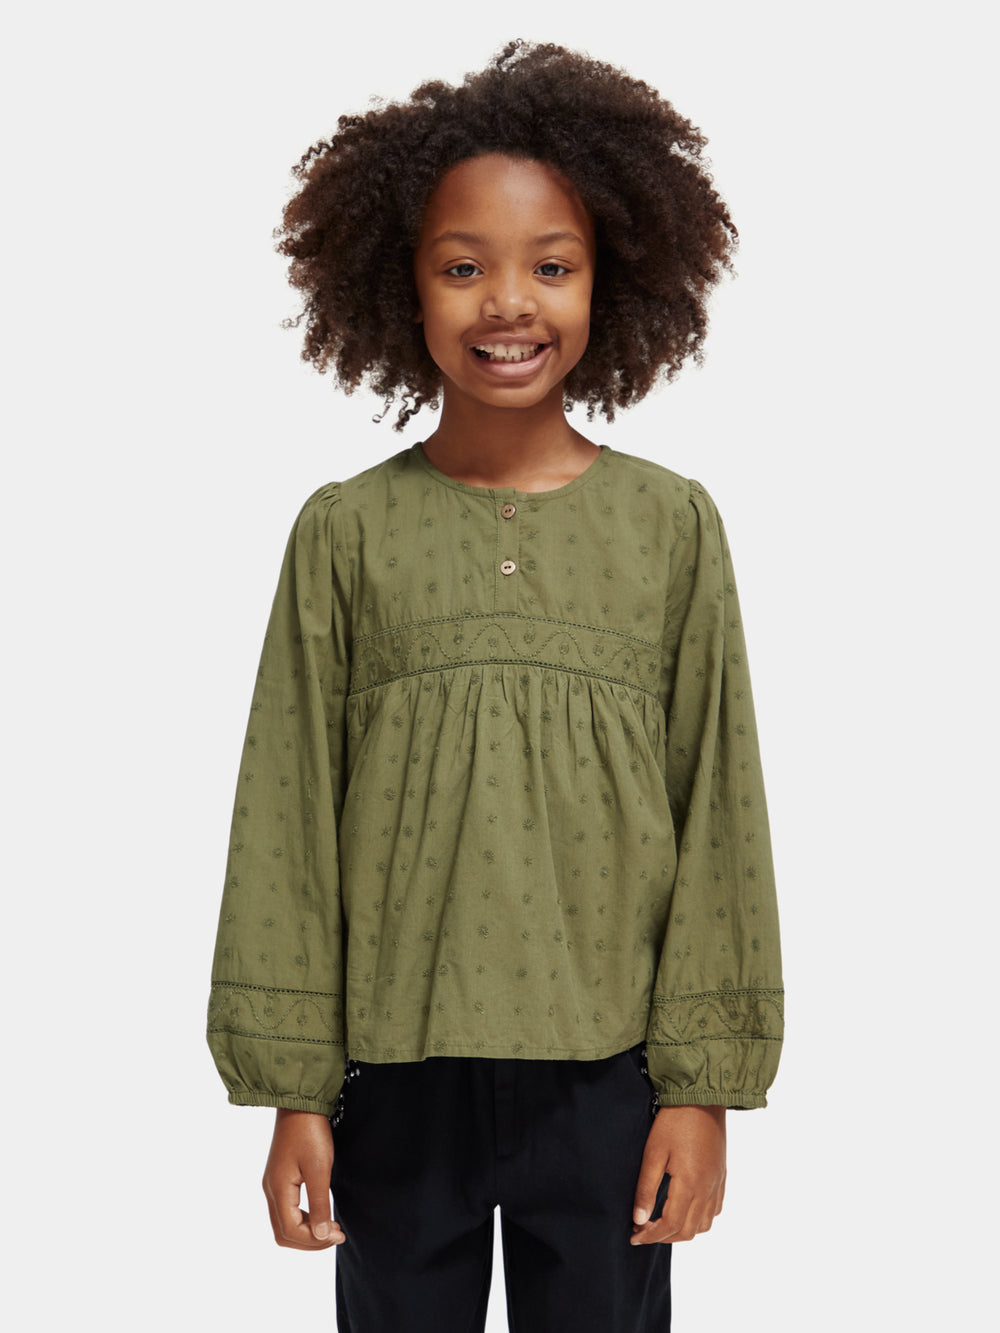 Kids - Broderie anglaise panelled top - Scotch & Soda AU